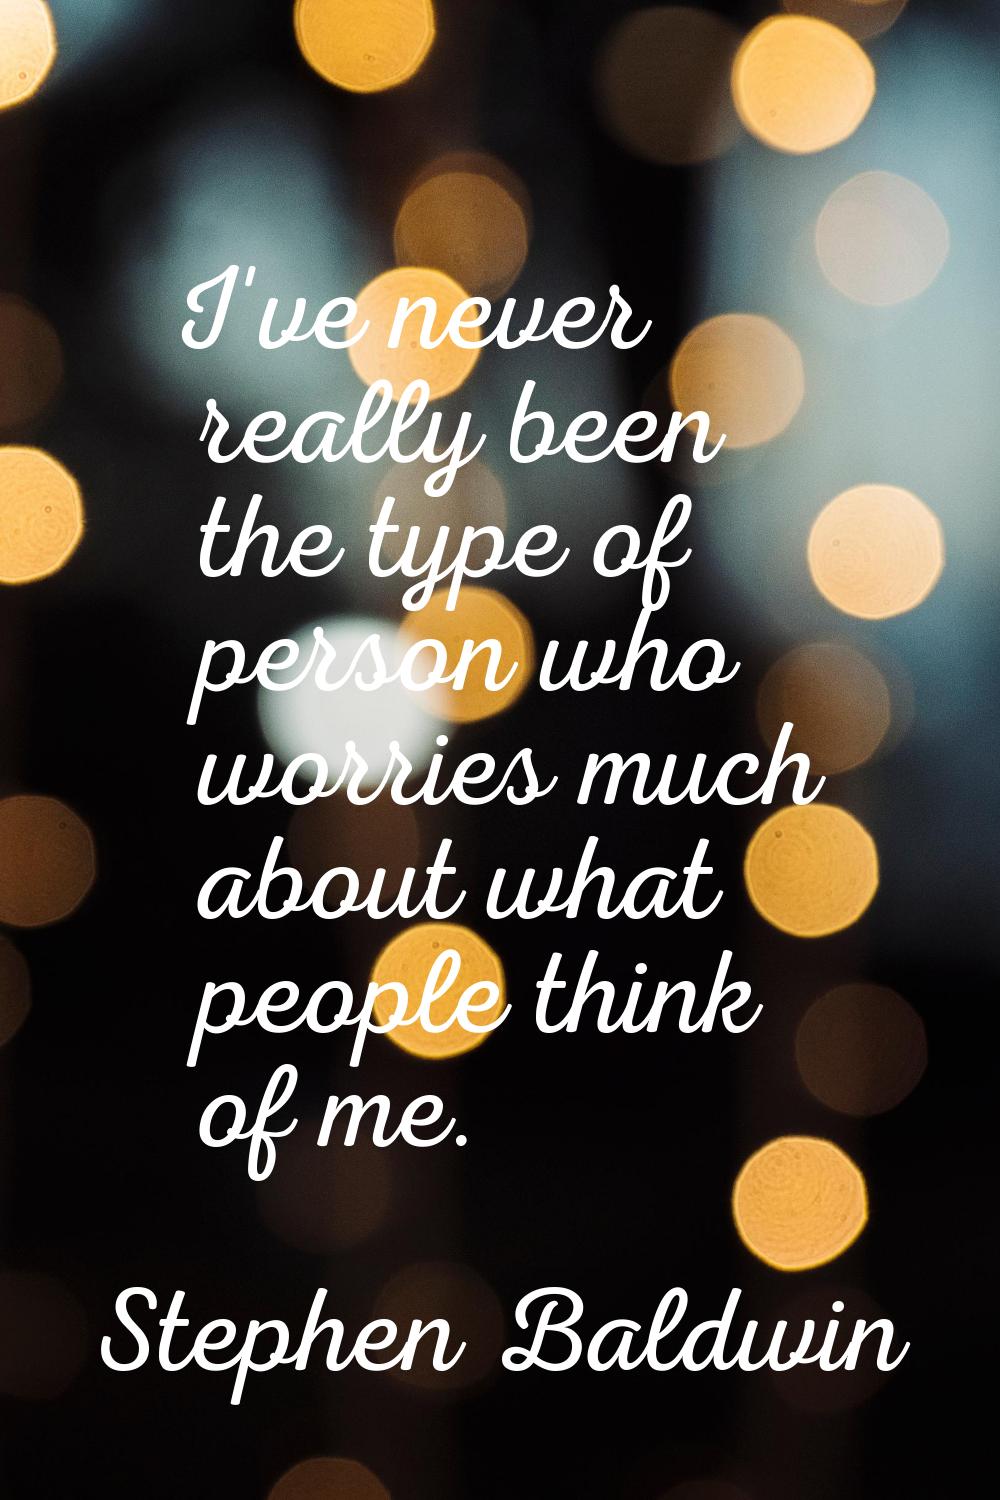 I've never really been the type of person who worries much about what people think of me.